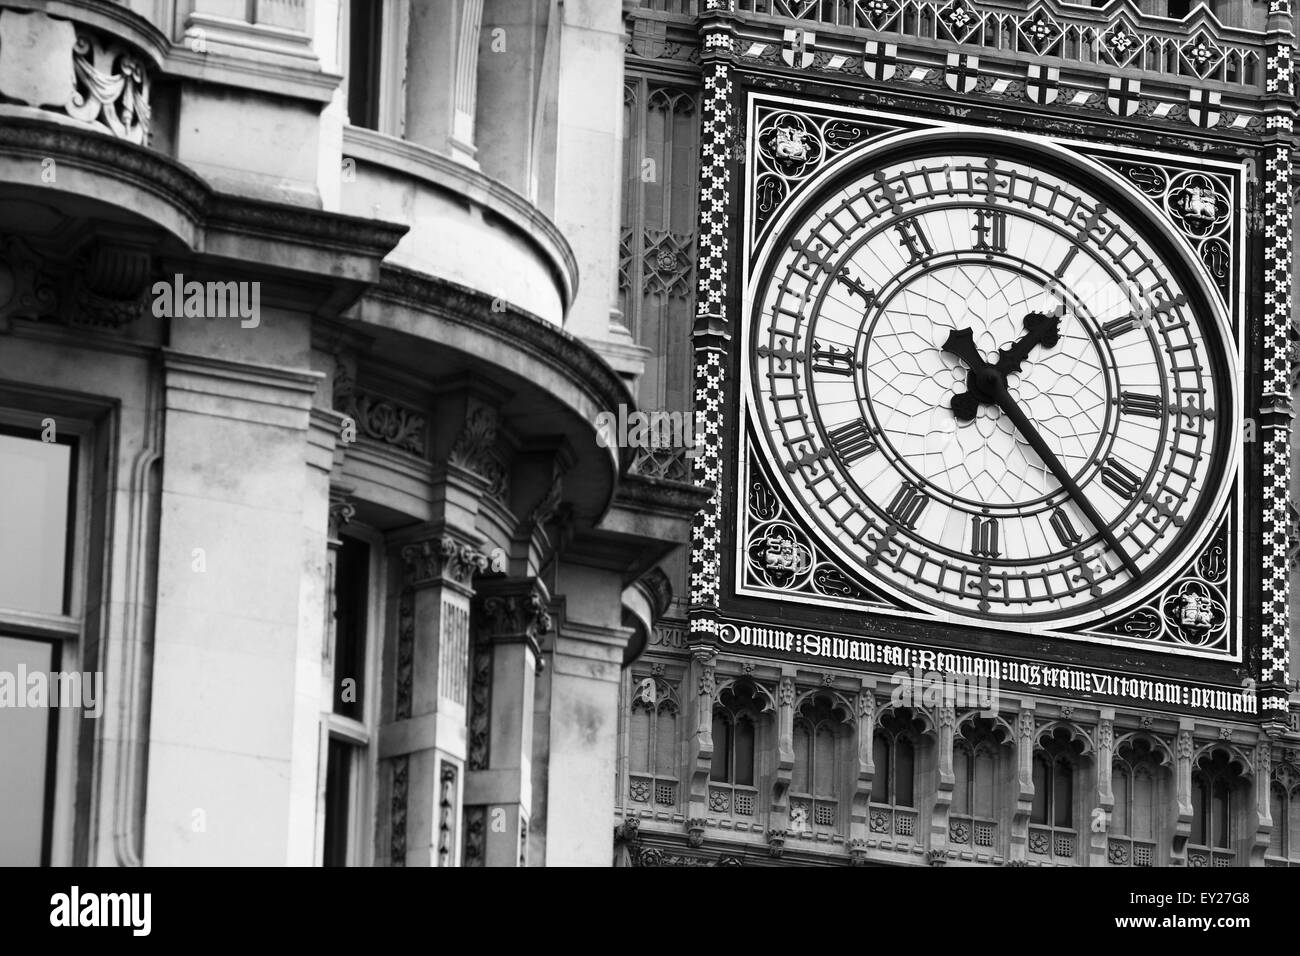 A view of a face of Big Ben with a building at the corner of  Parliament Street in the foreground. Stock Photo